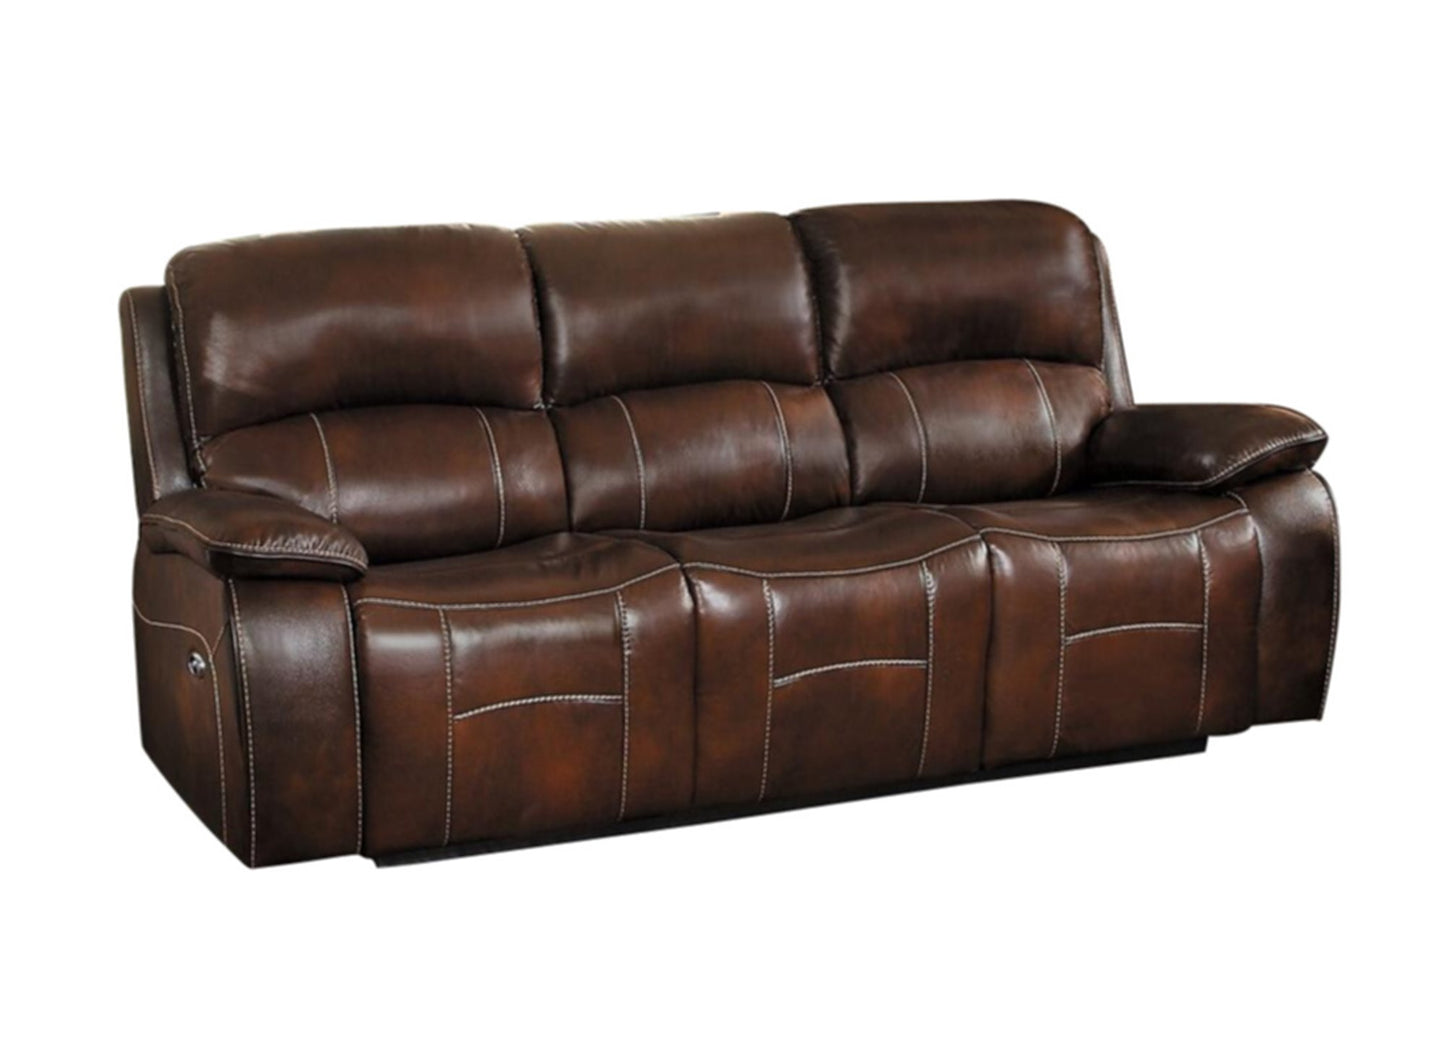 Homelegance Mahala 2PC Double Reclining Sofa & Glider Recliner Chair in Brown Top Grain Leather